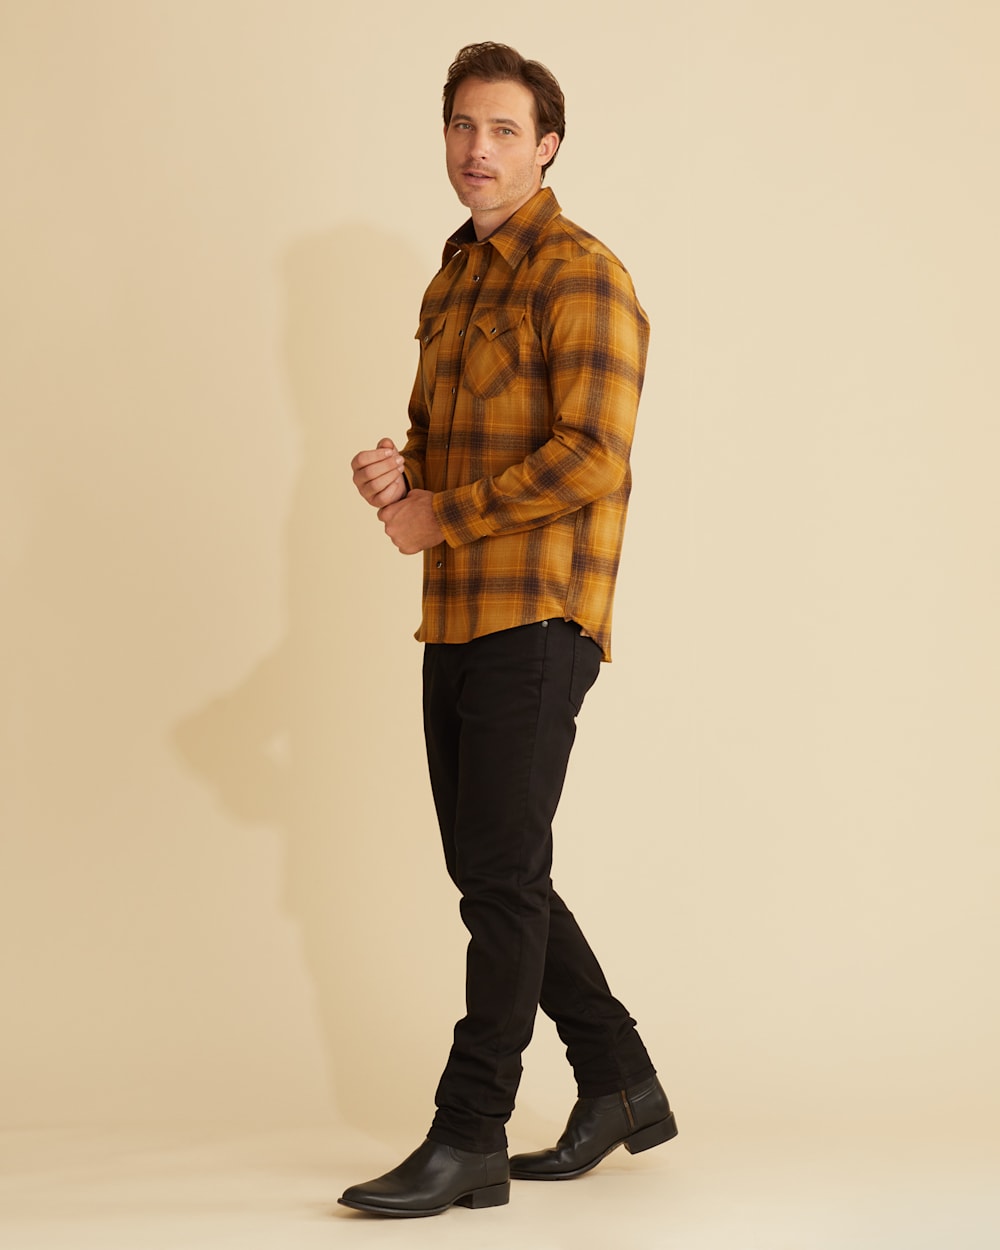 ALTERNATE VIEW OF MEN'S PLAID SNAP-FRONT WESTERN CANYON SHIRT IN GOLD/BROWN OMBRE image number 4